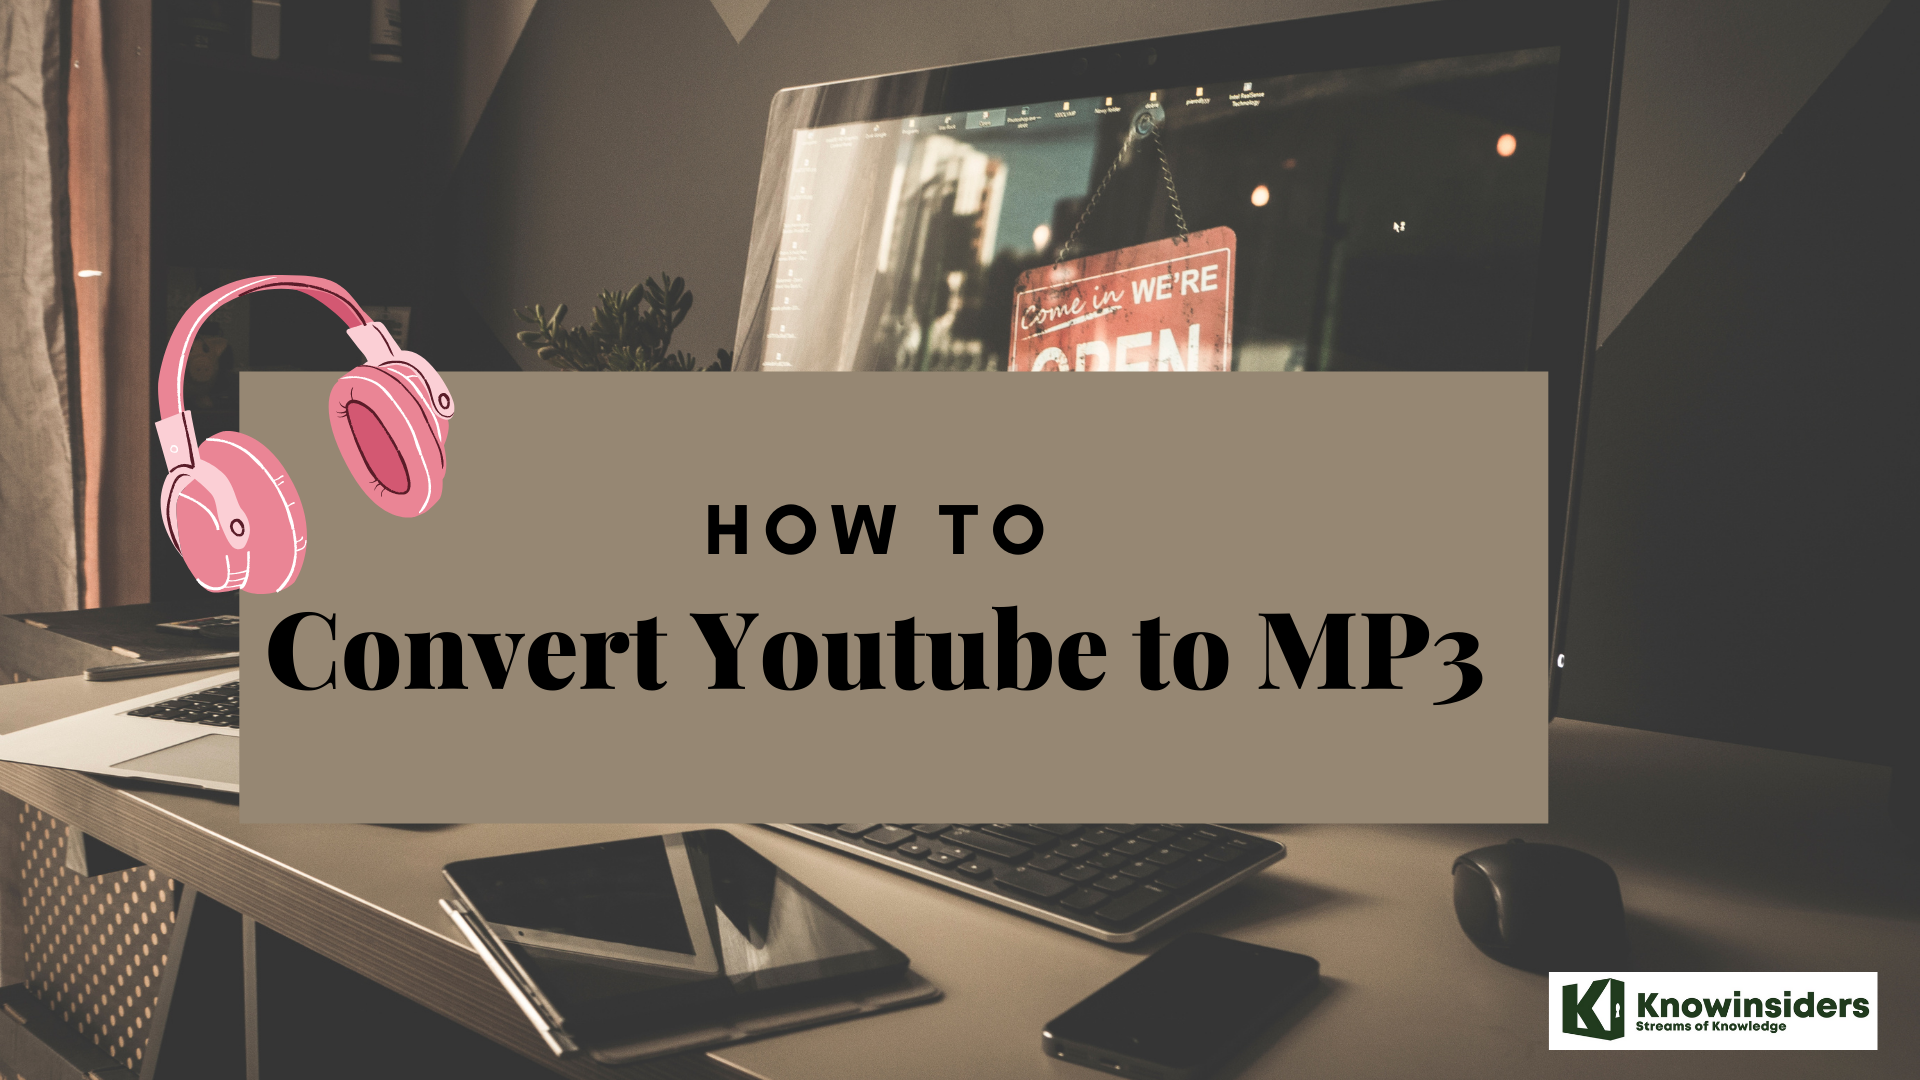 How To Convert Youtube Videos To MP3: Simple and Easy Steps